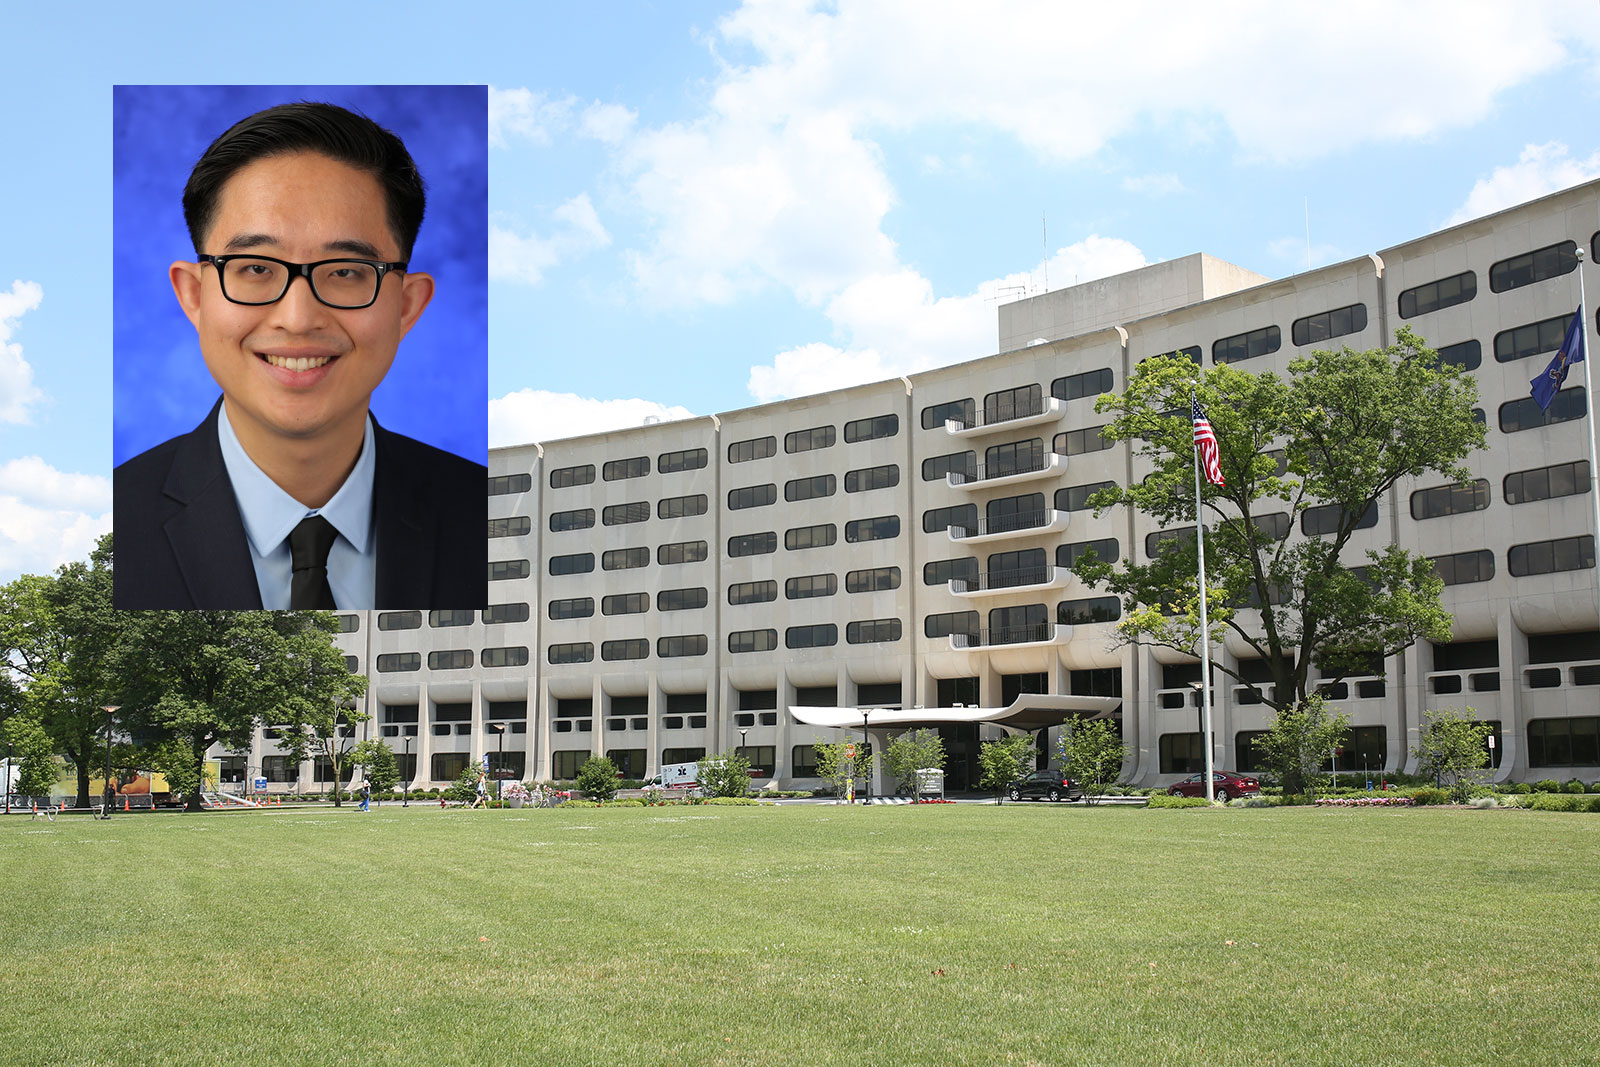 Tony Lin, a student in Penn State College of Medicine's MD/MPH program, will complete a diagnostic radiology residency at Yale New Haven Hospital in Connecticut. A head-and-shoulders photo of Lin in a suit and tie is superimposed at the top left of a photo of the College's Crescent building, showing the building, trees and a large expanse of lawn.